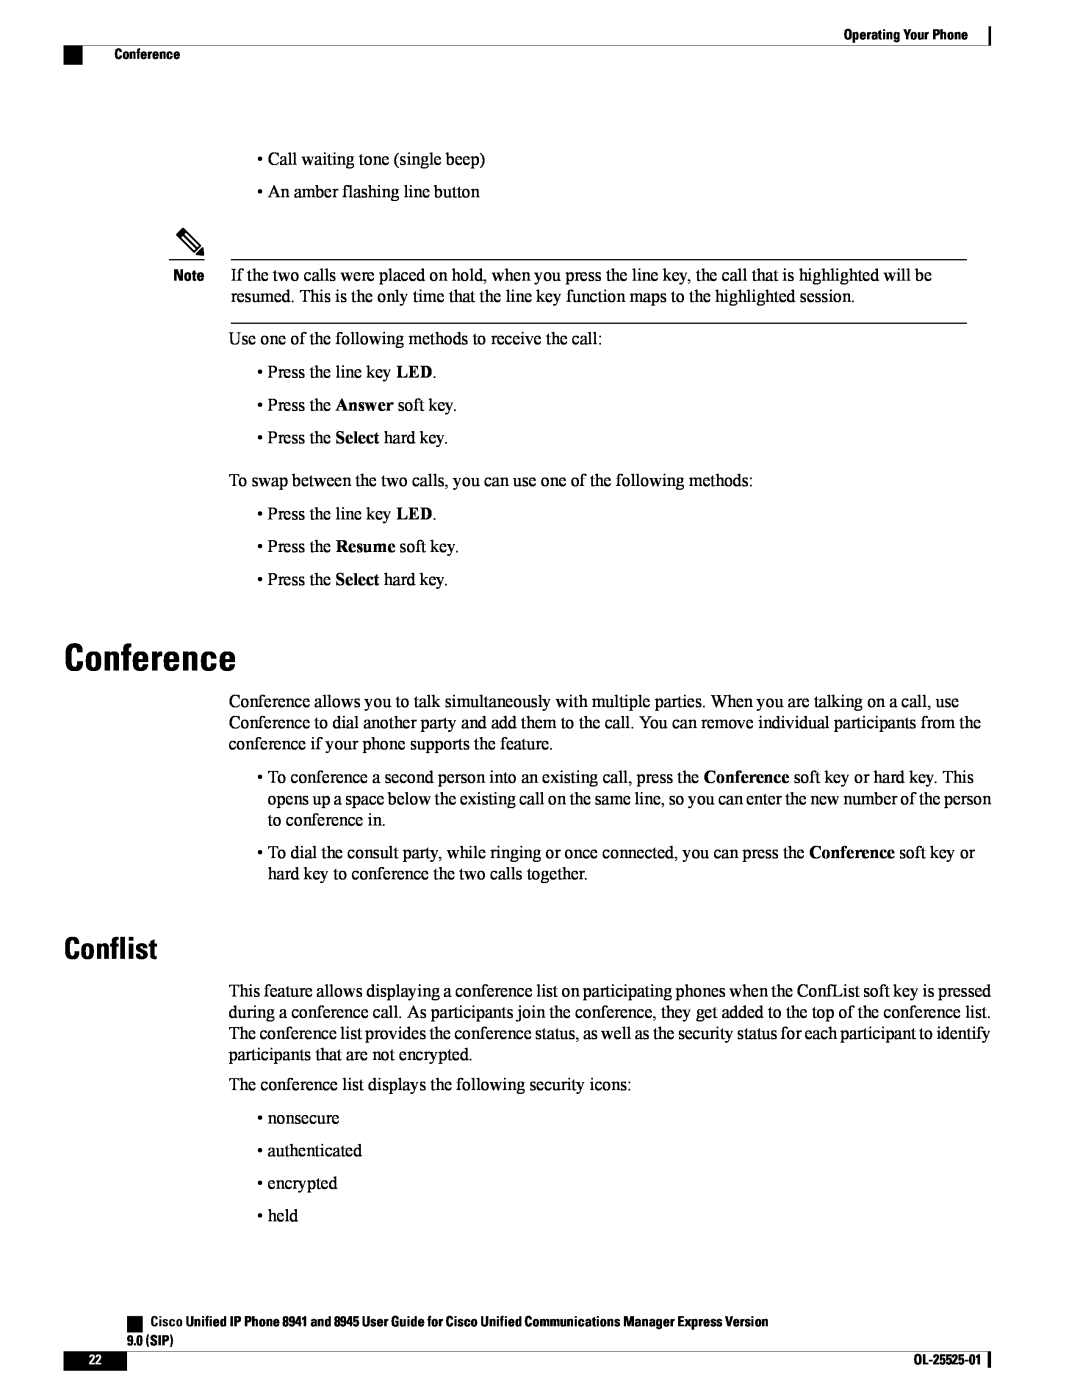 Cisco Systems 8941, 8945 manual Conference, Conflist 